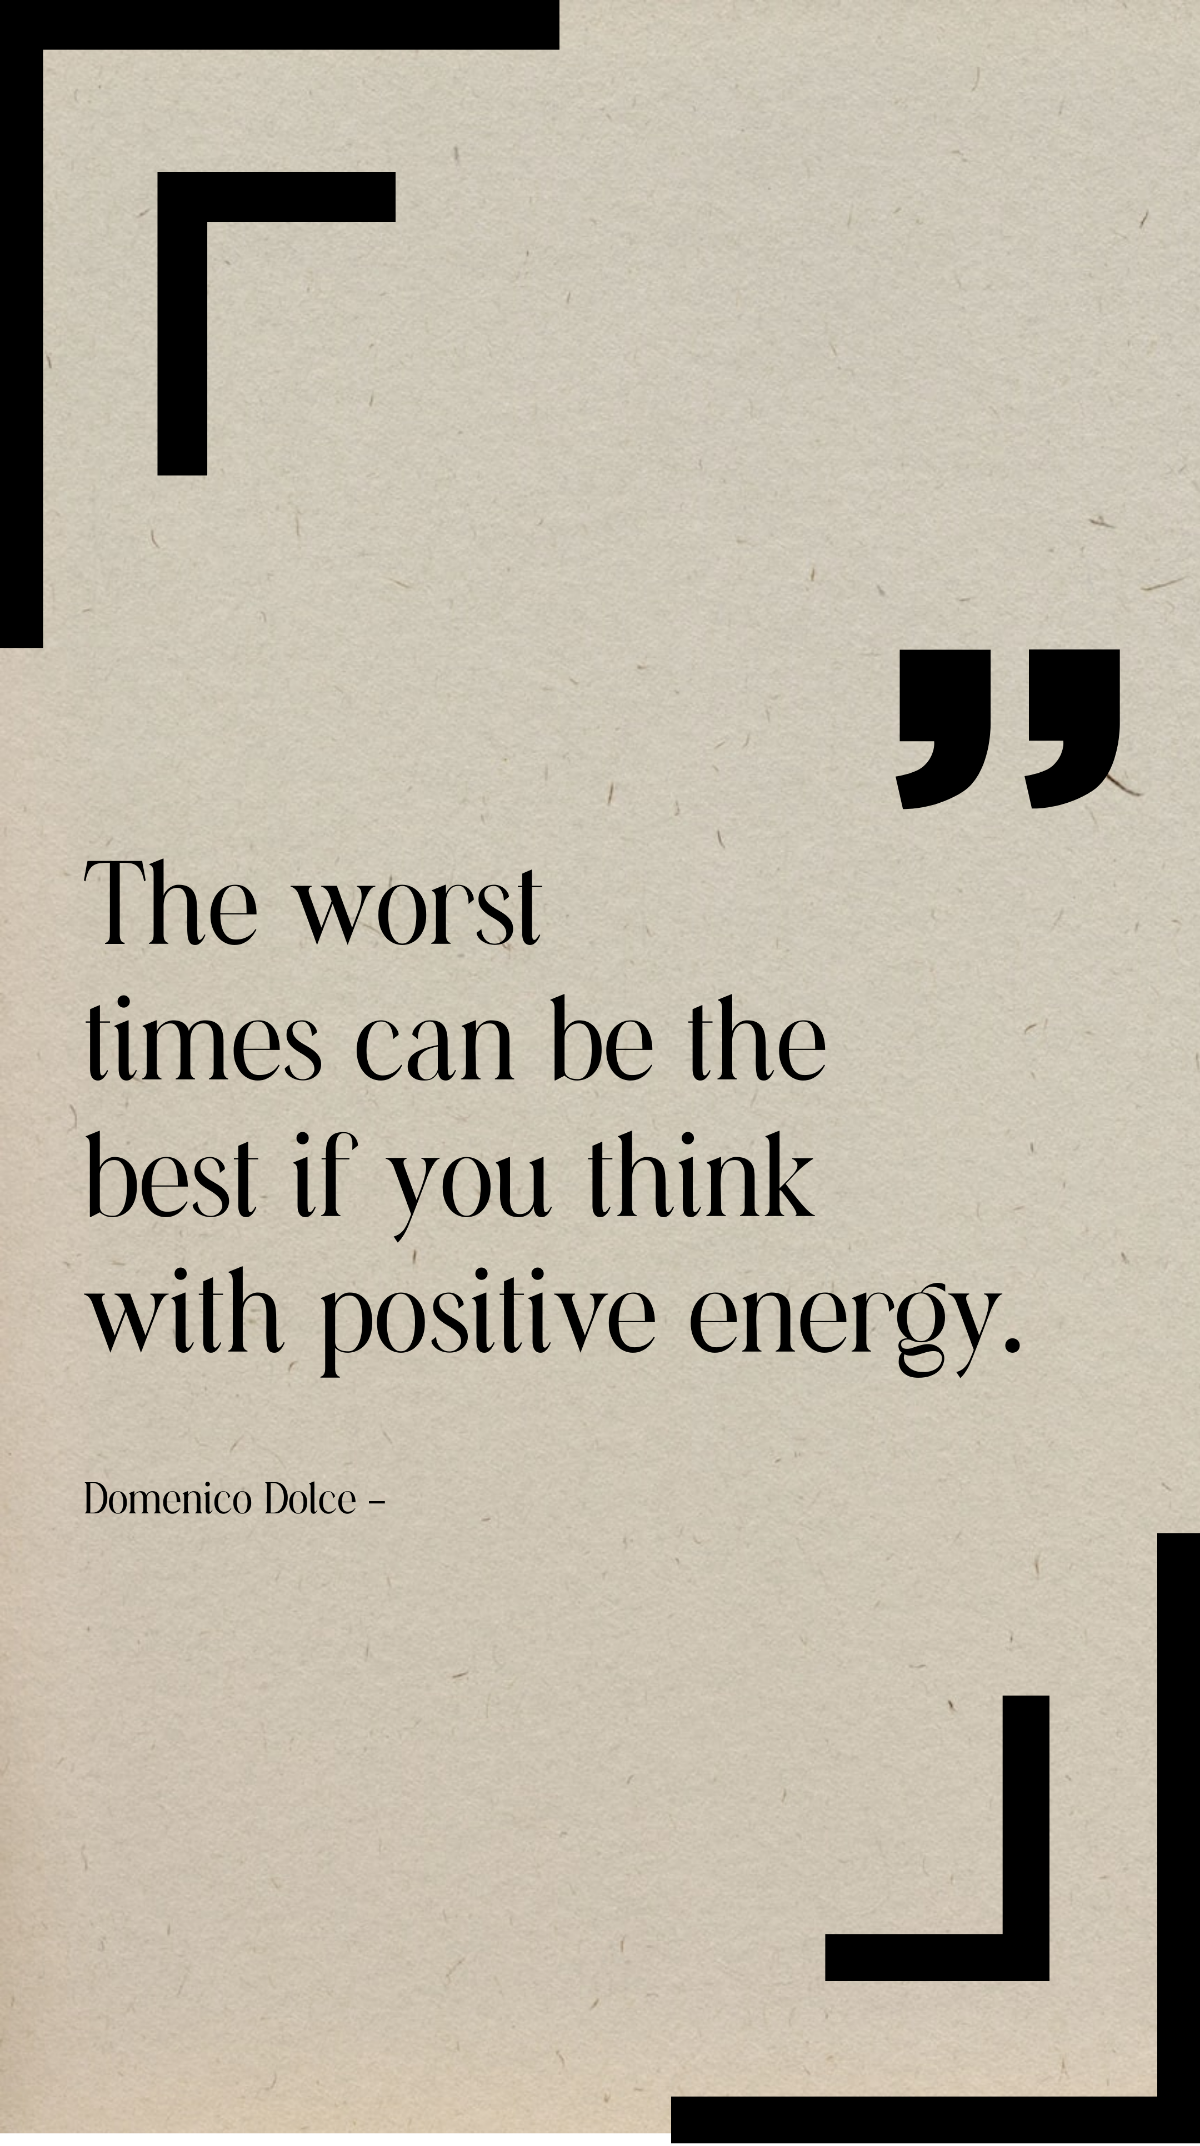 Domenico Dolce - The worst times can be the best if you think with positive energy. Template